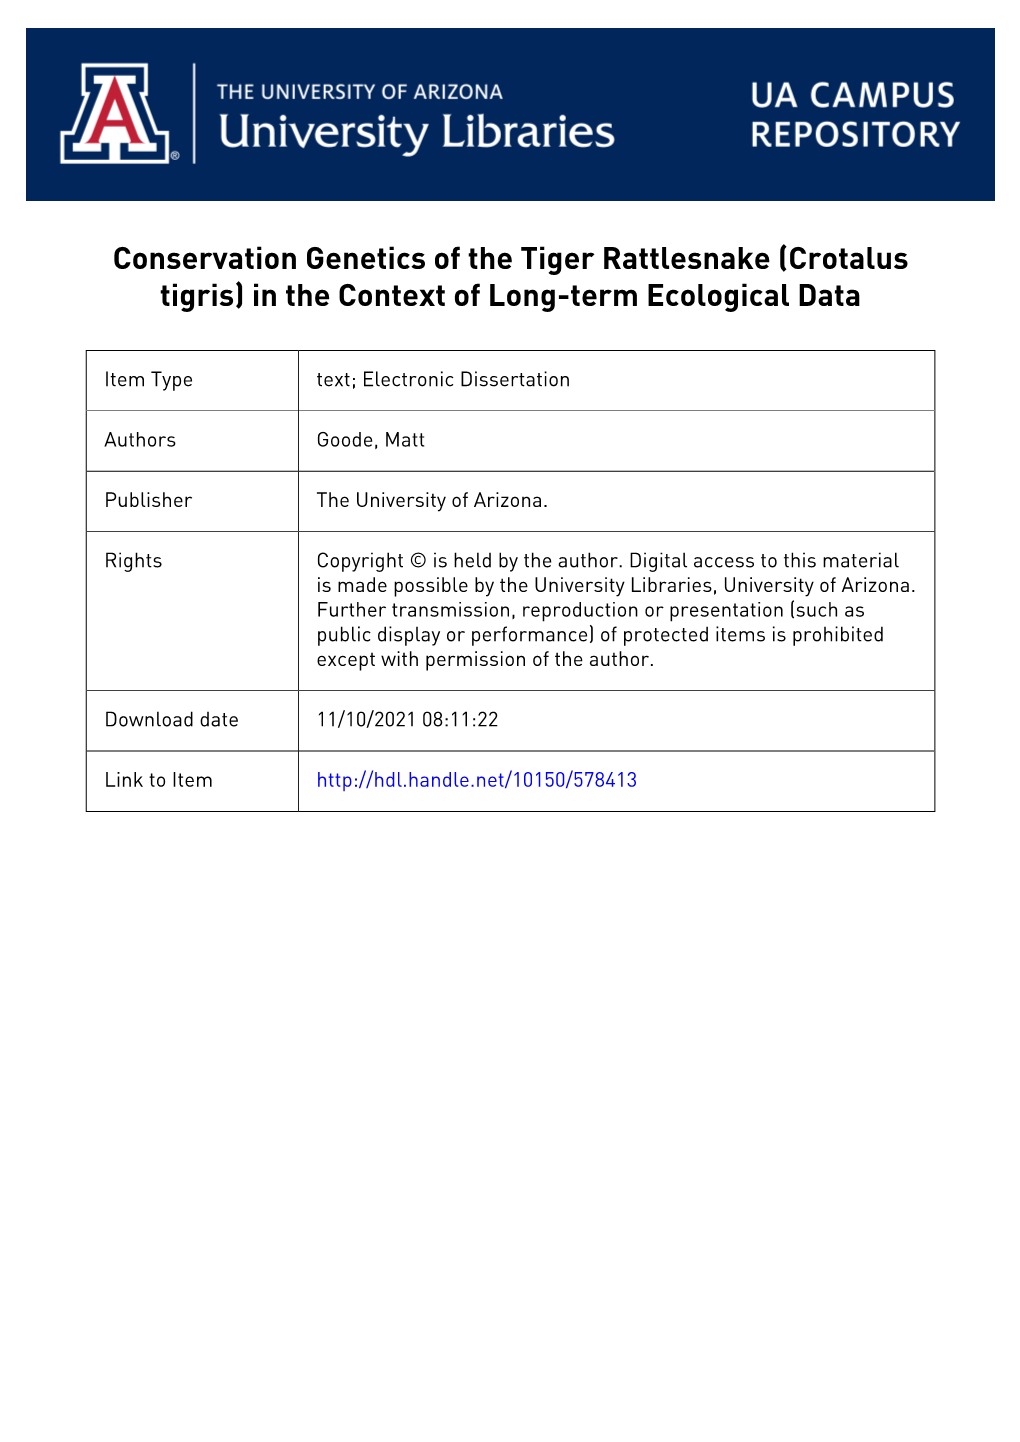 Conservation Genetics of the Tiger Rattlesnake (Crotalus Tigris) in the Context of Long-Term Ecological Data